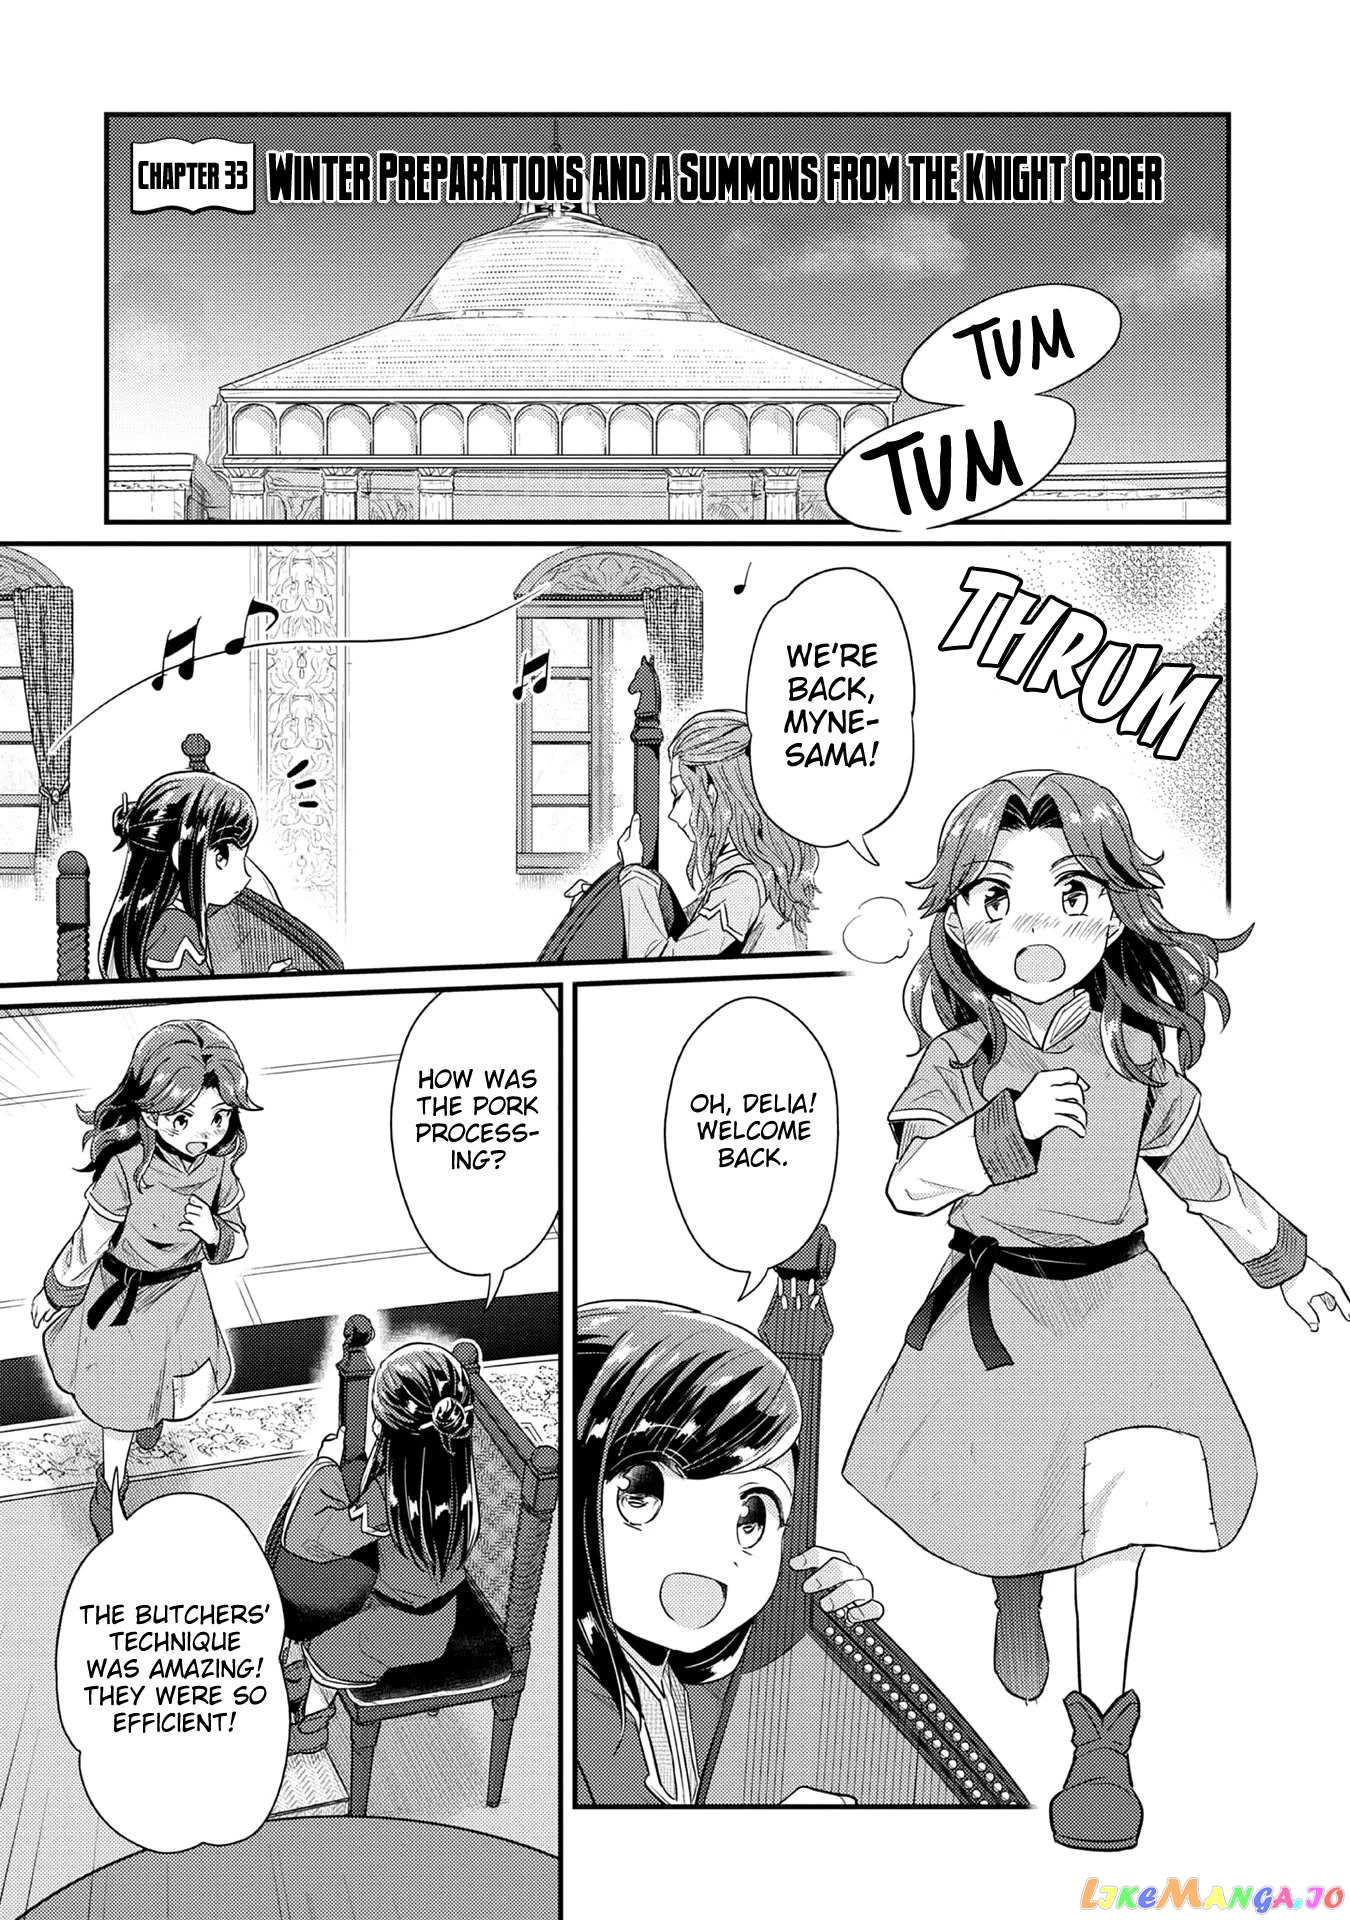 Ascendance of a Bookworm ~I'll Do Anything to Become a Librarian~ Part 2 「I'll Become a Shrine Maiden for Books!」 chapter 33 - page 2